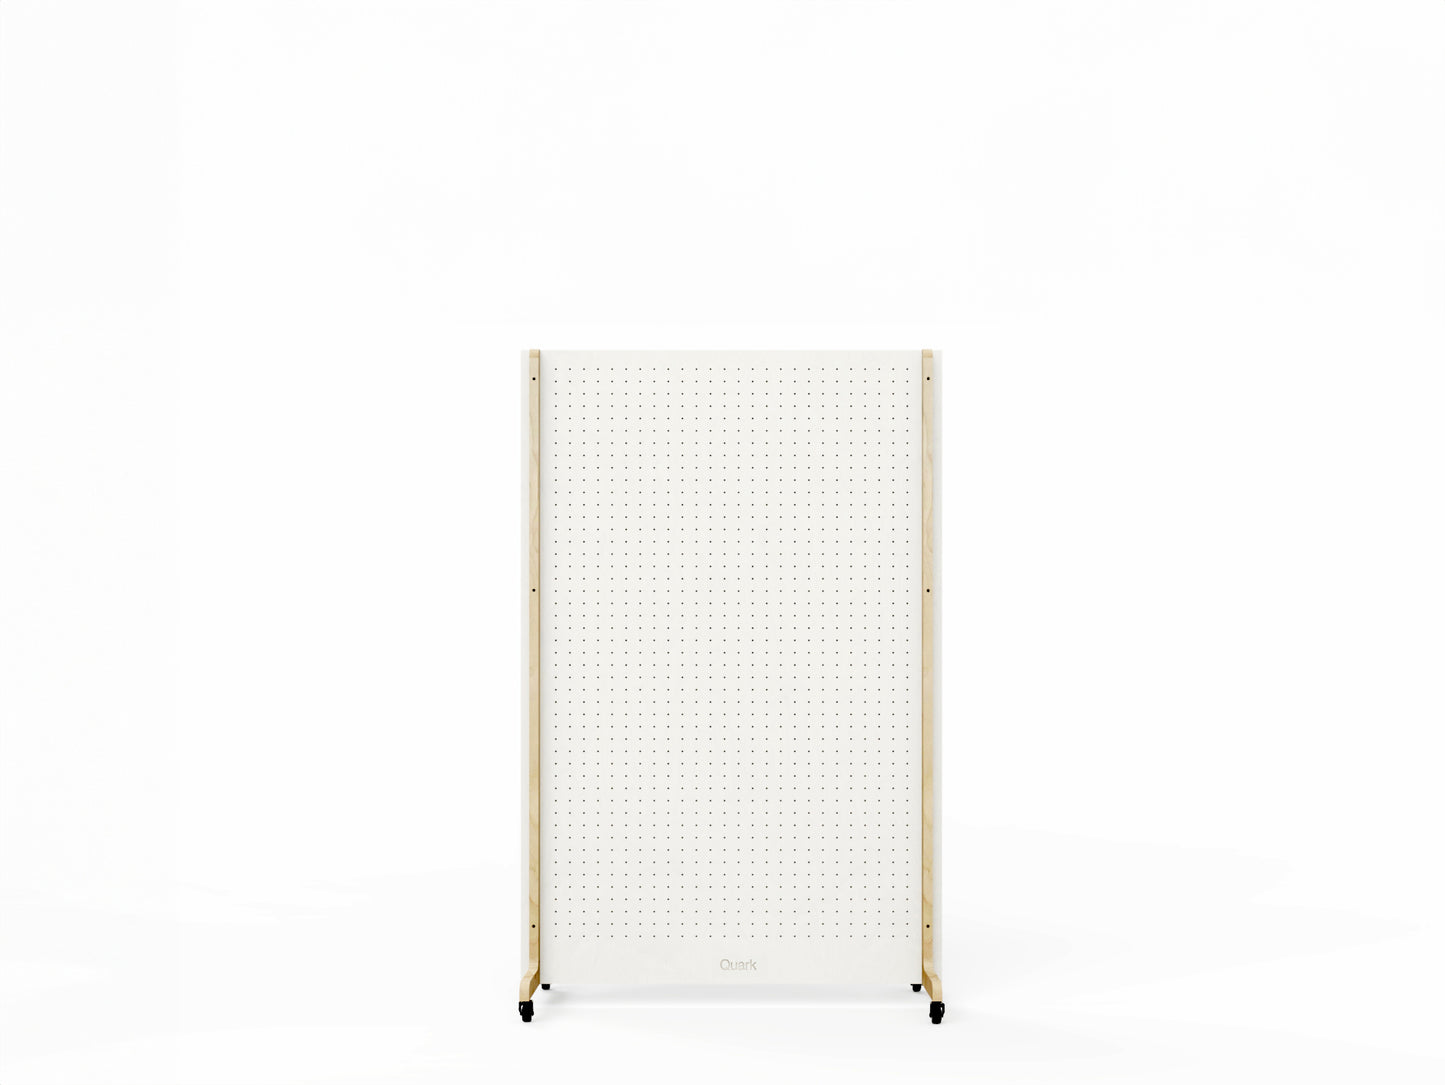 Pegboard FlexiMove: The mobile wall on casters made in France